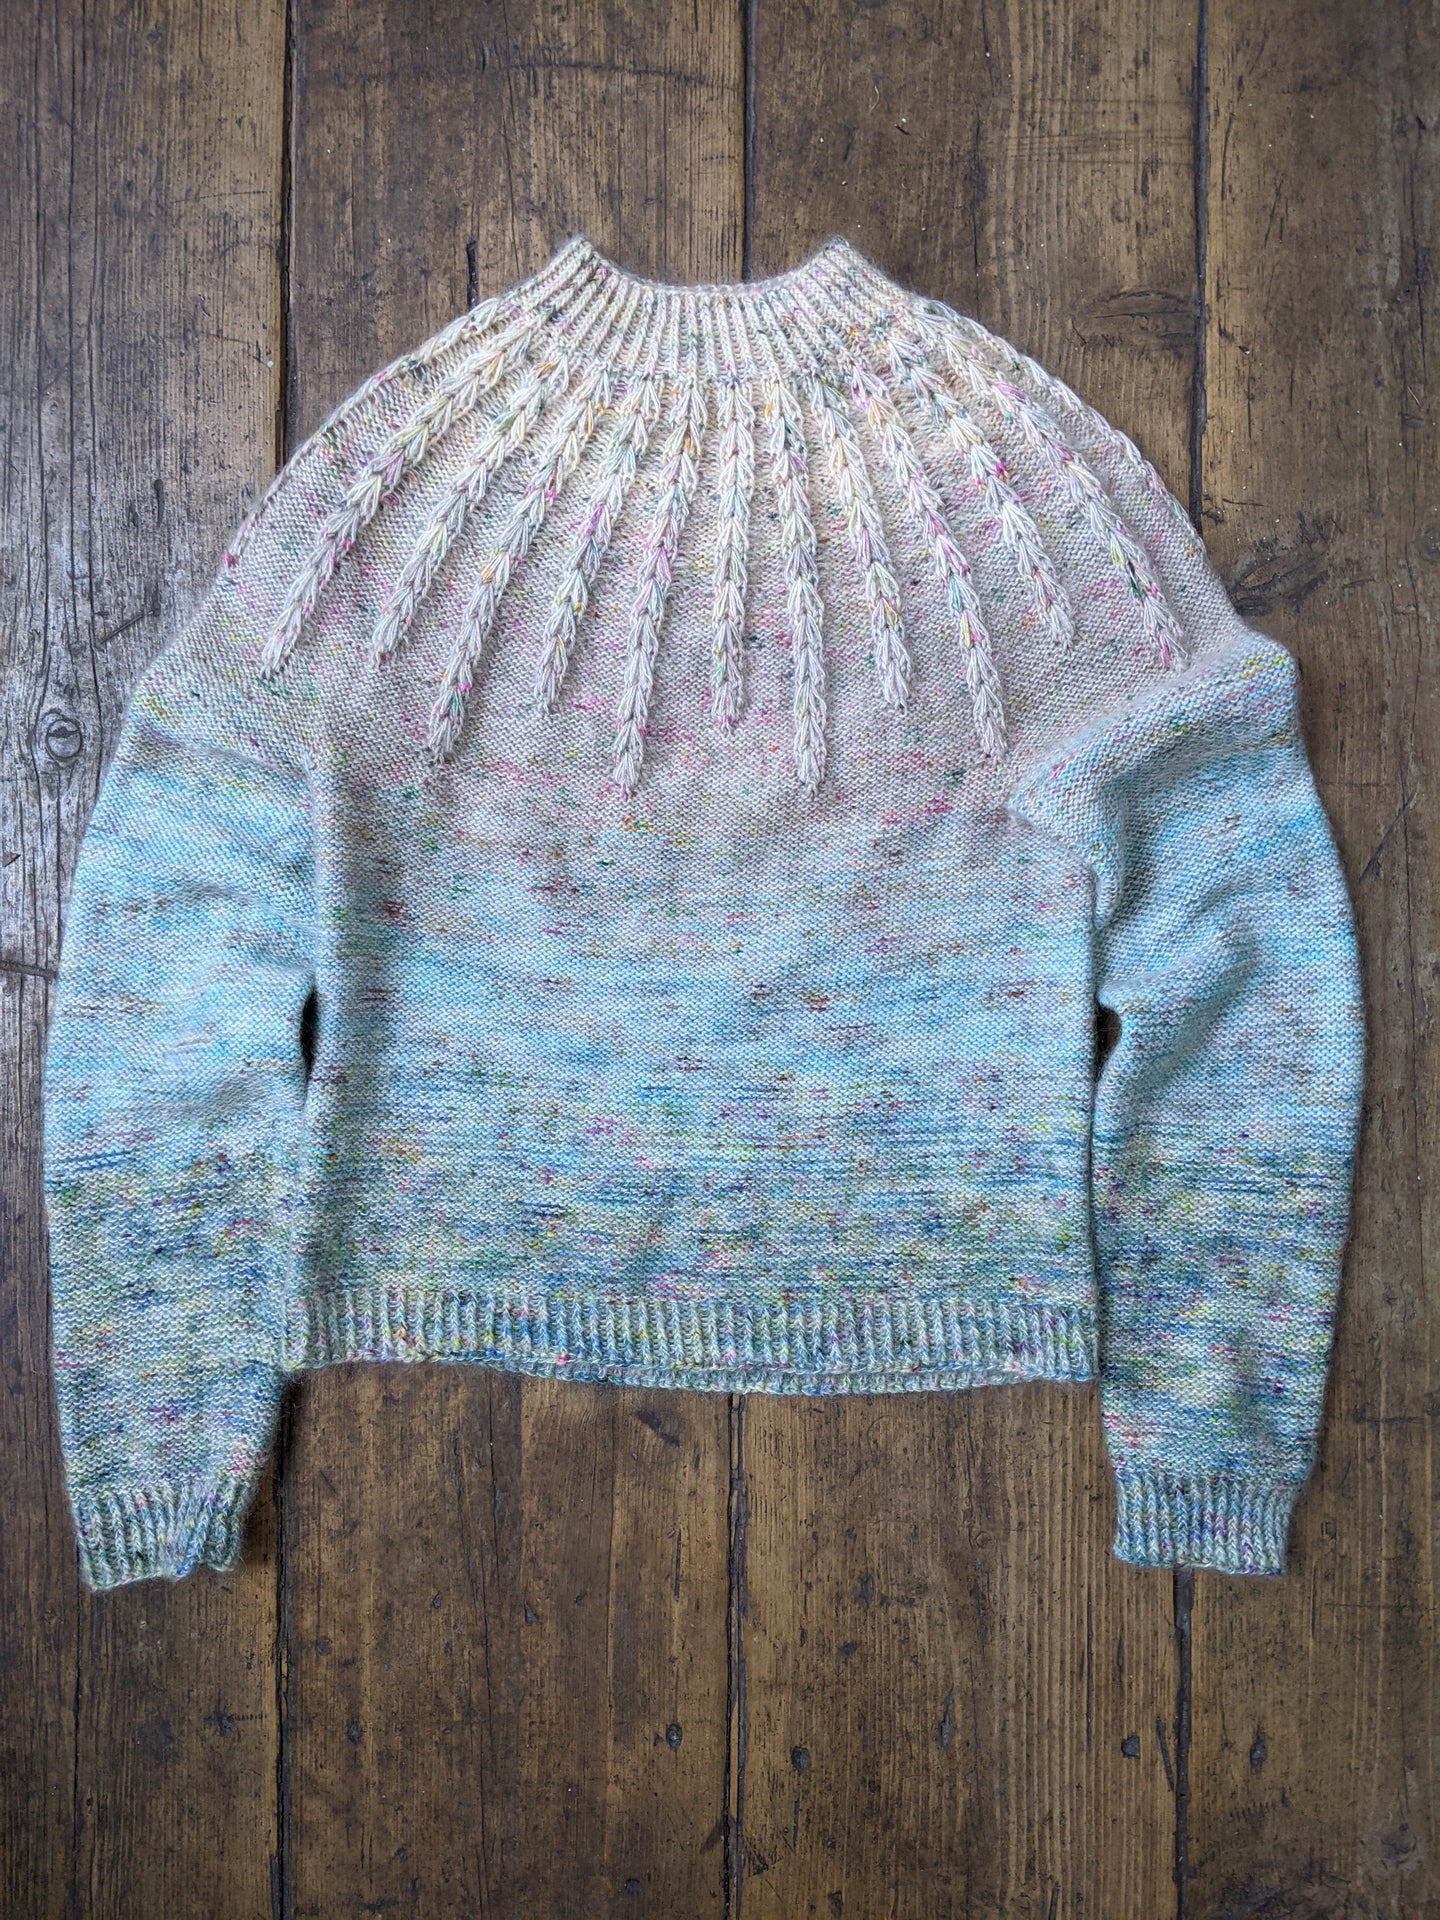 Sorrel Sweater (by Woold and Pine Designs) Kit - preorder